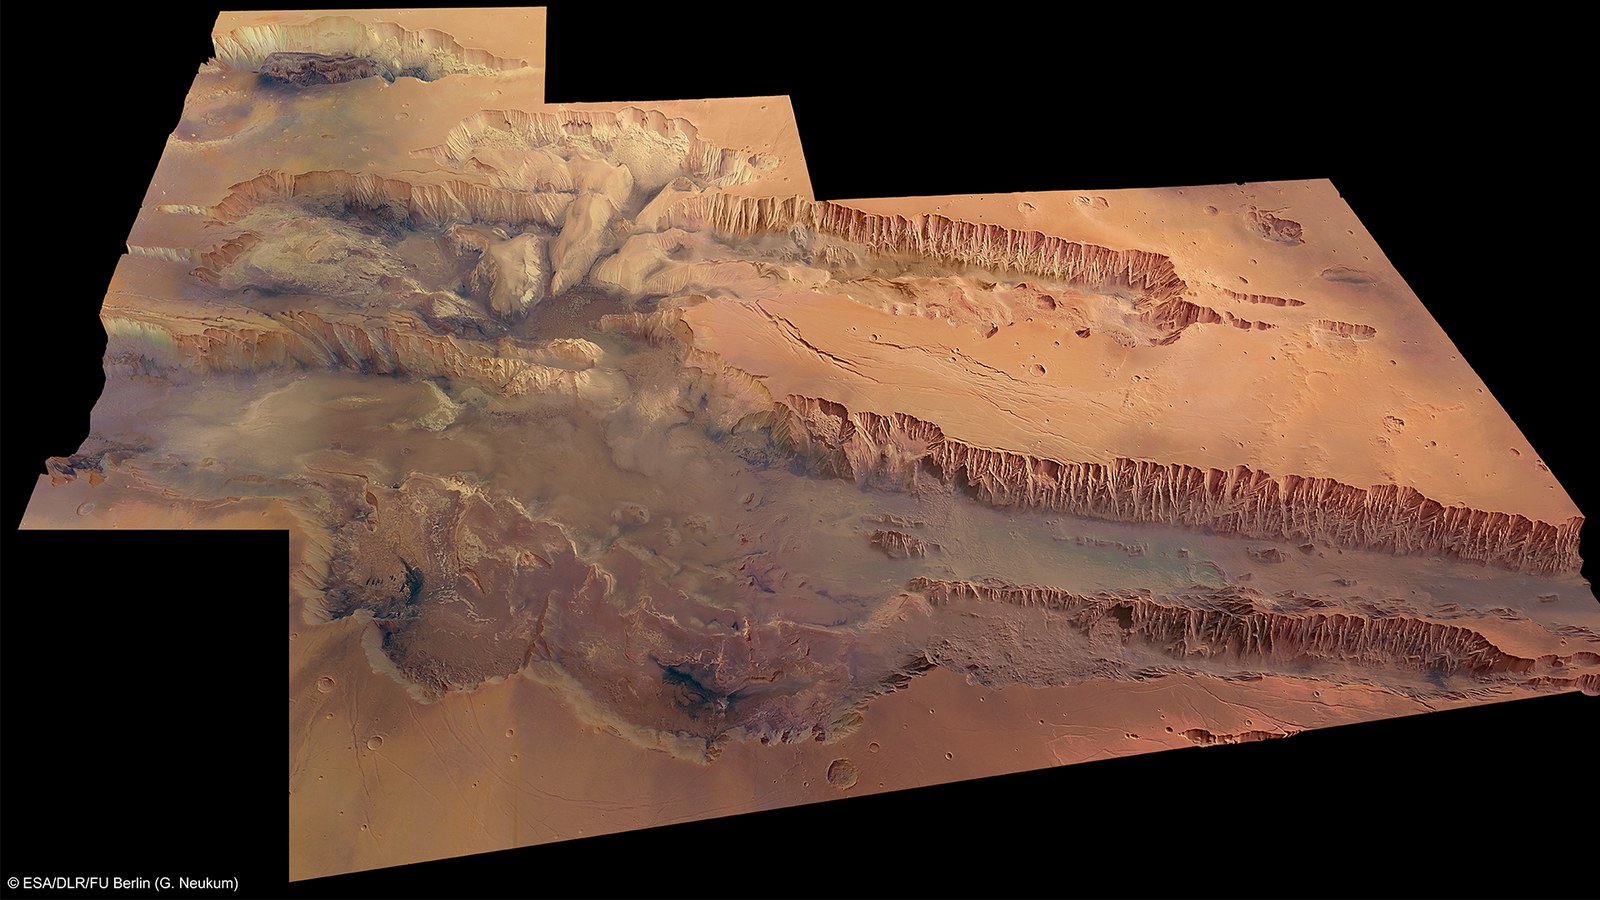 Valles Marineris – the largest canyon in the Solar System